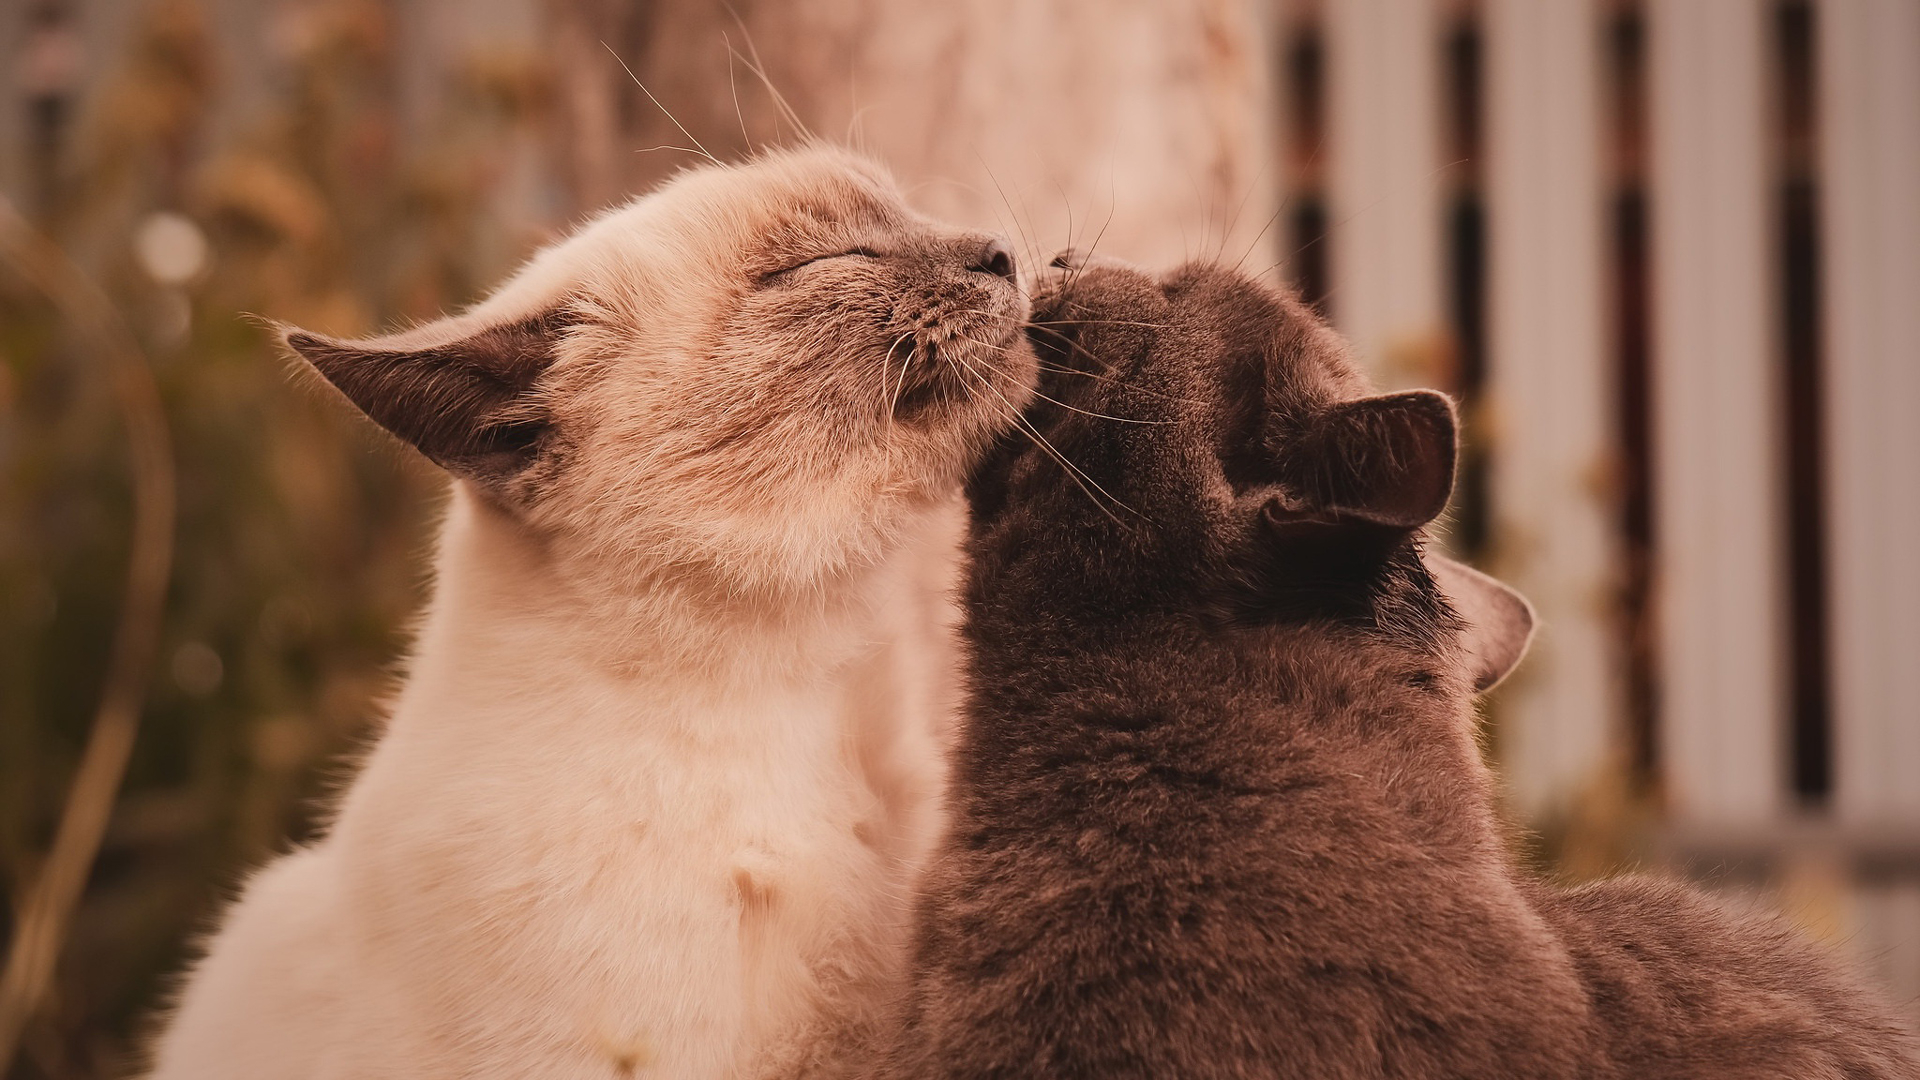 Two cats rubbing their faces against each other